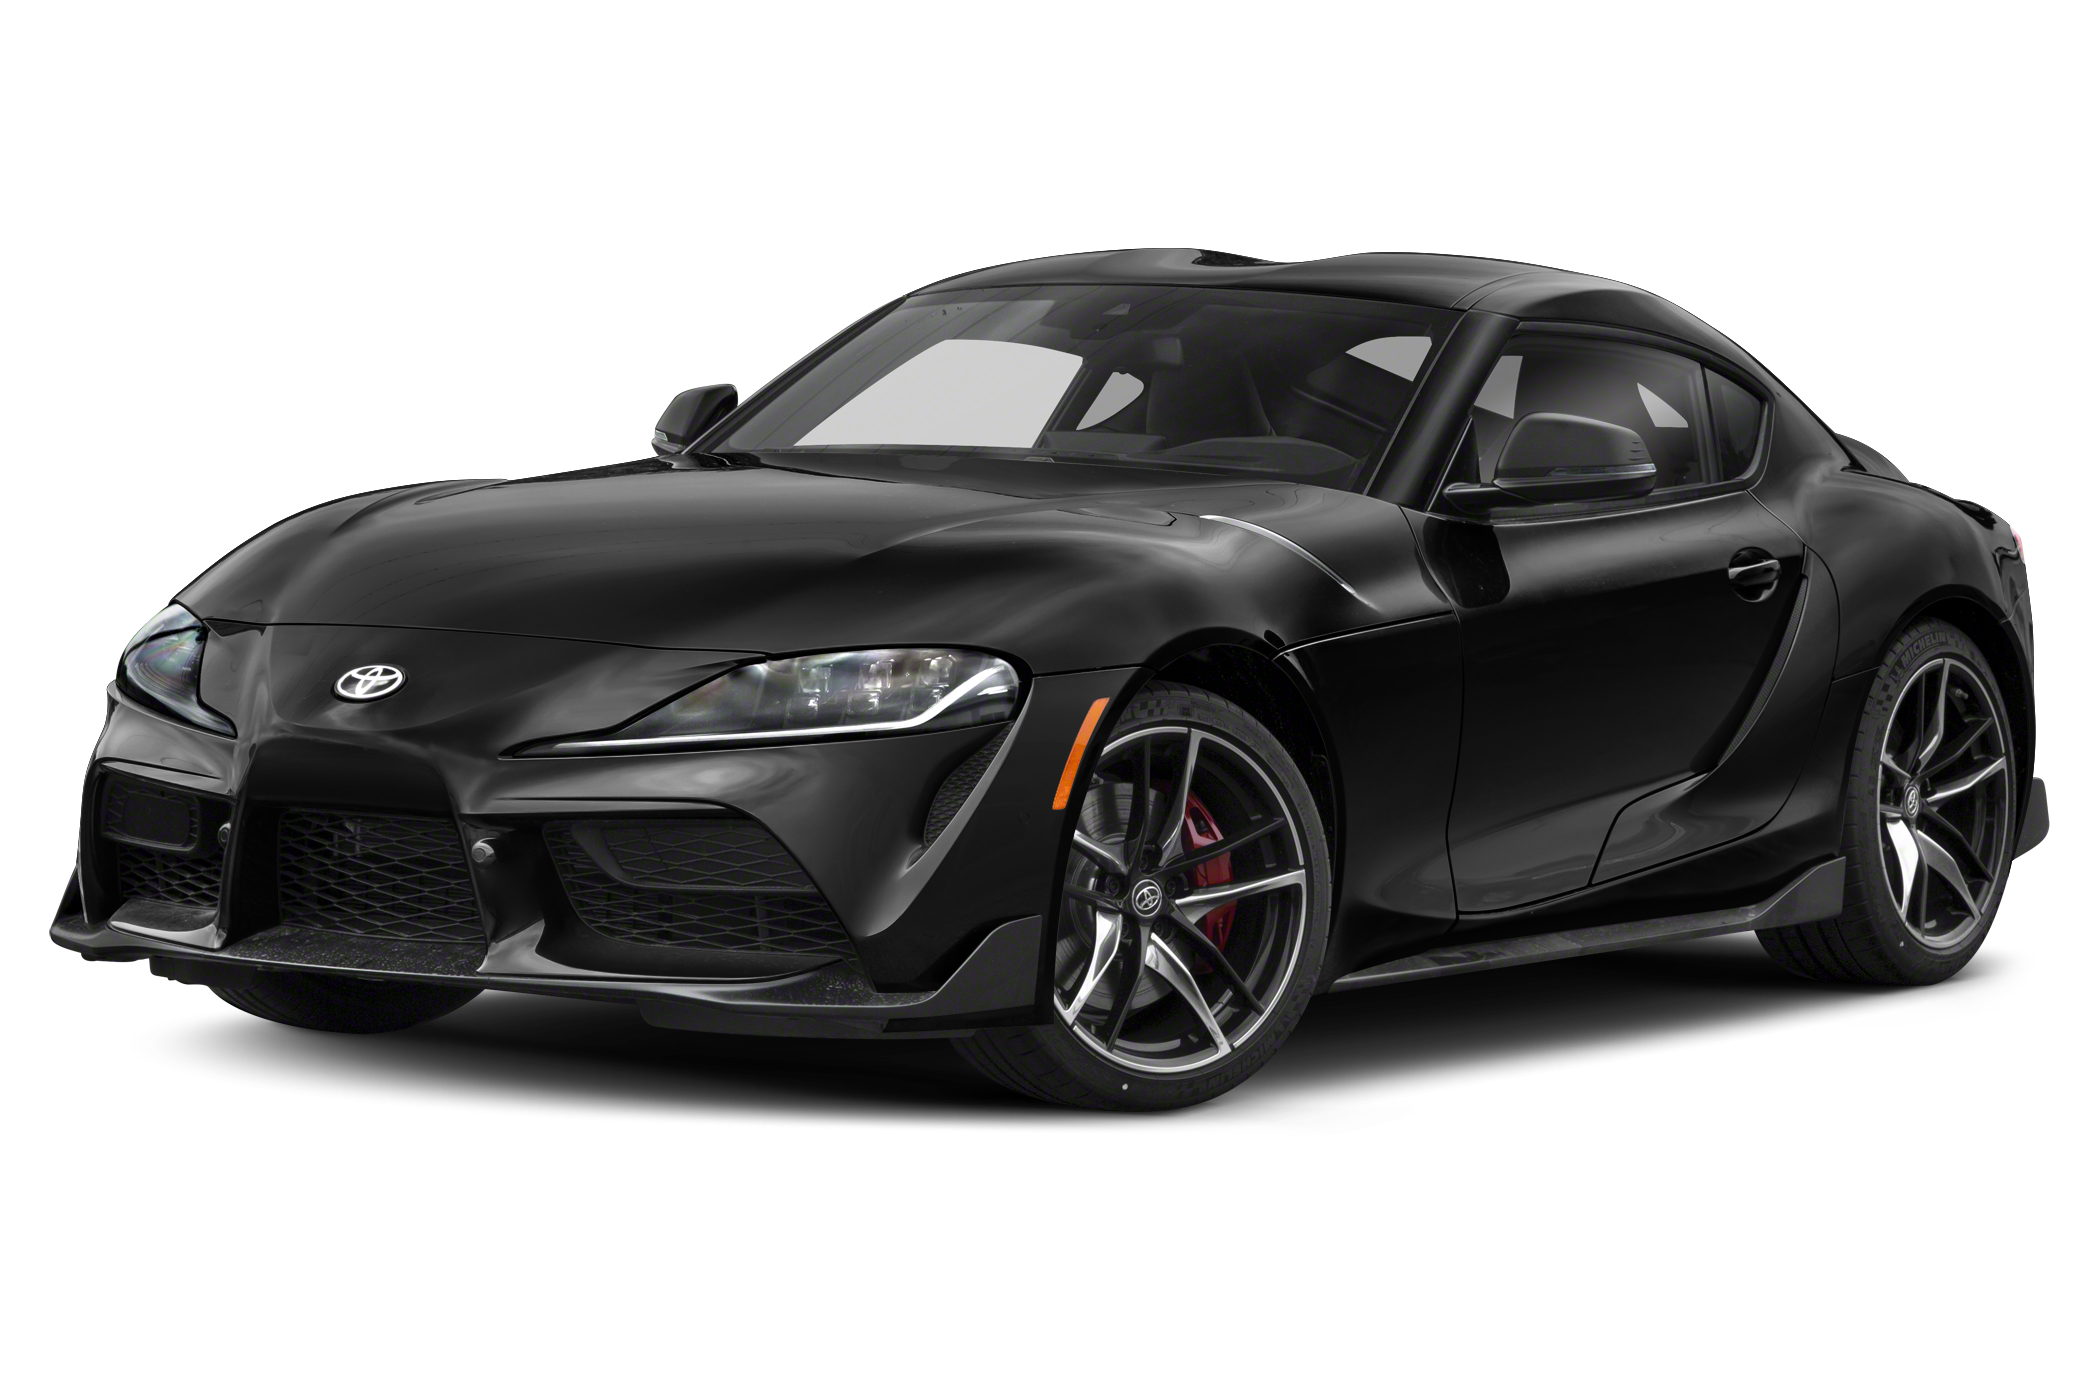 My Love-Hate Relationship with the Four-Cylinder Toyota Supra